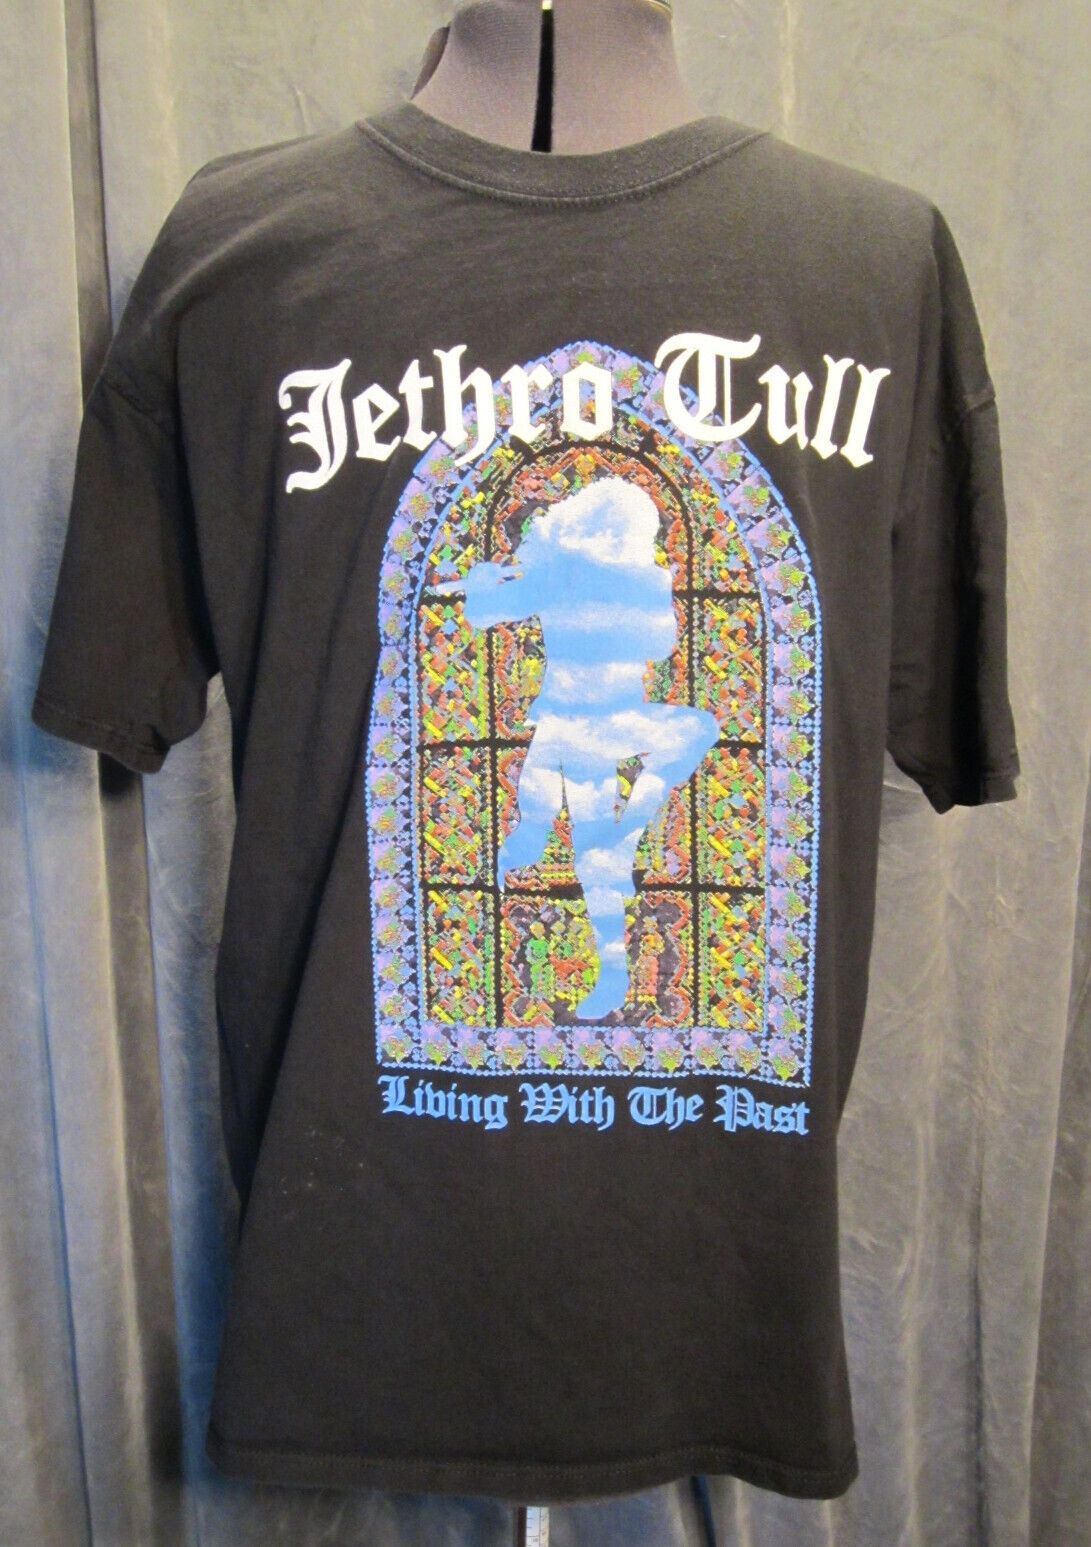 Jethro Tull Tee Shirt Living With The Past 2002 Tour Black Short Sleeve Large